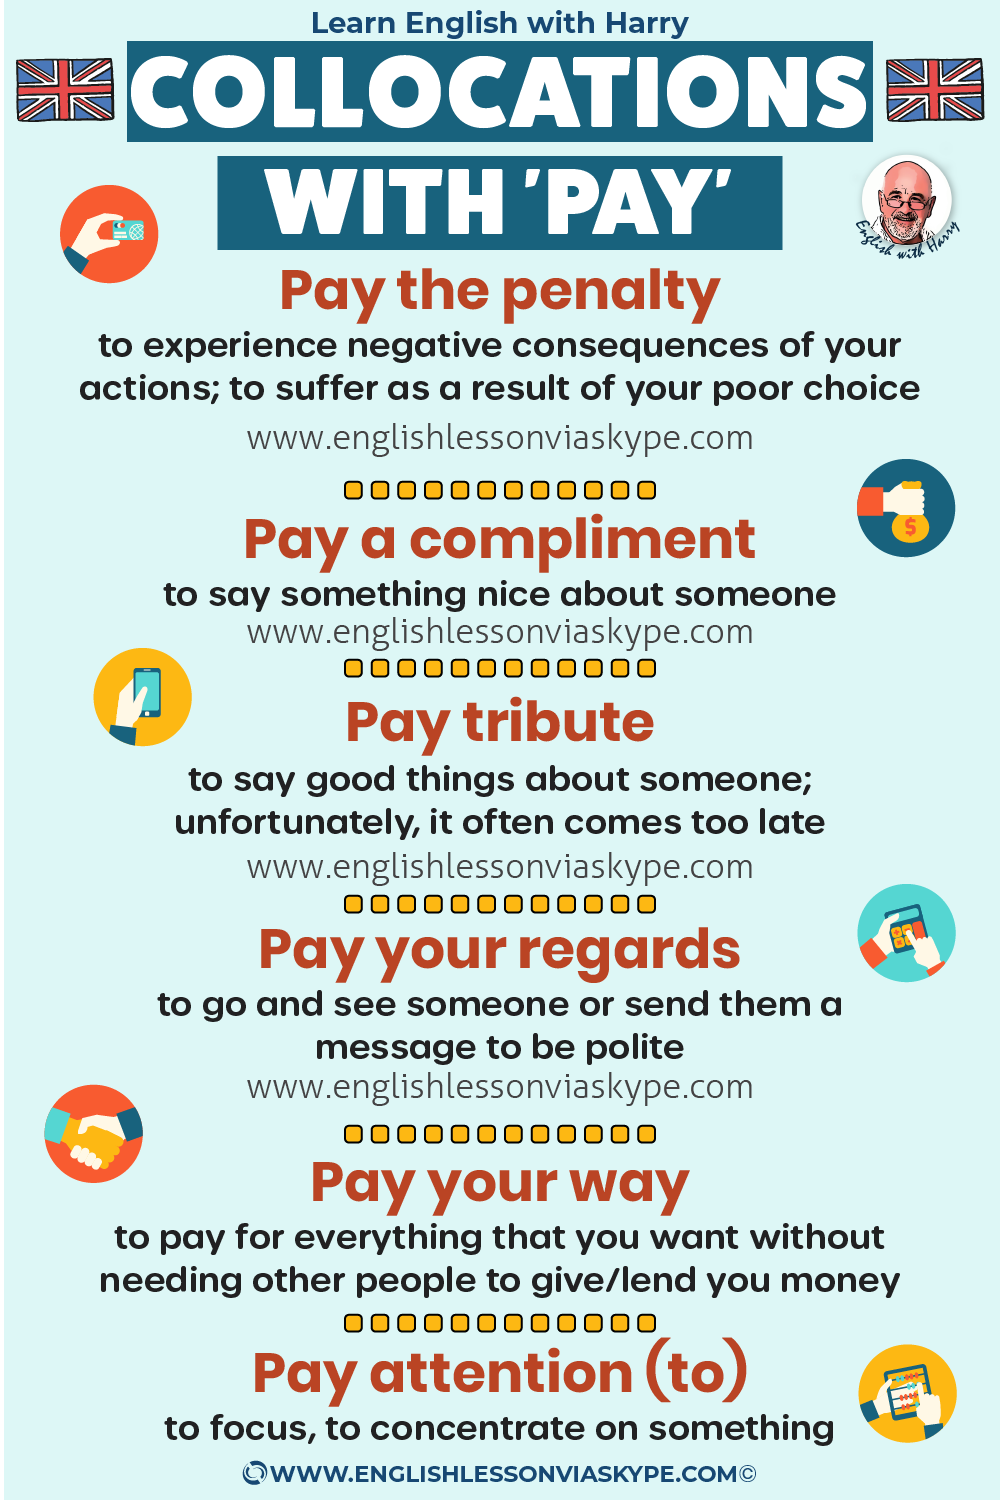 8 English collocations with pay. Improve business English vocabulary. Advanced English learning. English lessons on Zoom at www.englishlessonviaskype.com #learnenglish #englishlessons #EnglishTeacher #vocabulary #ingles #อังกฤษ #английский #aprenderingles #english #cursodeingles #учианглийский